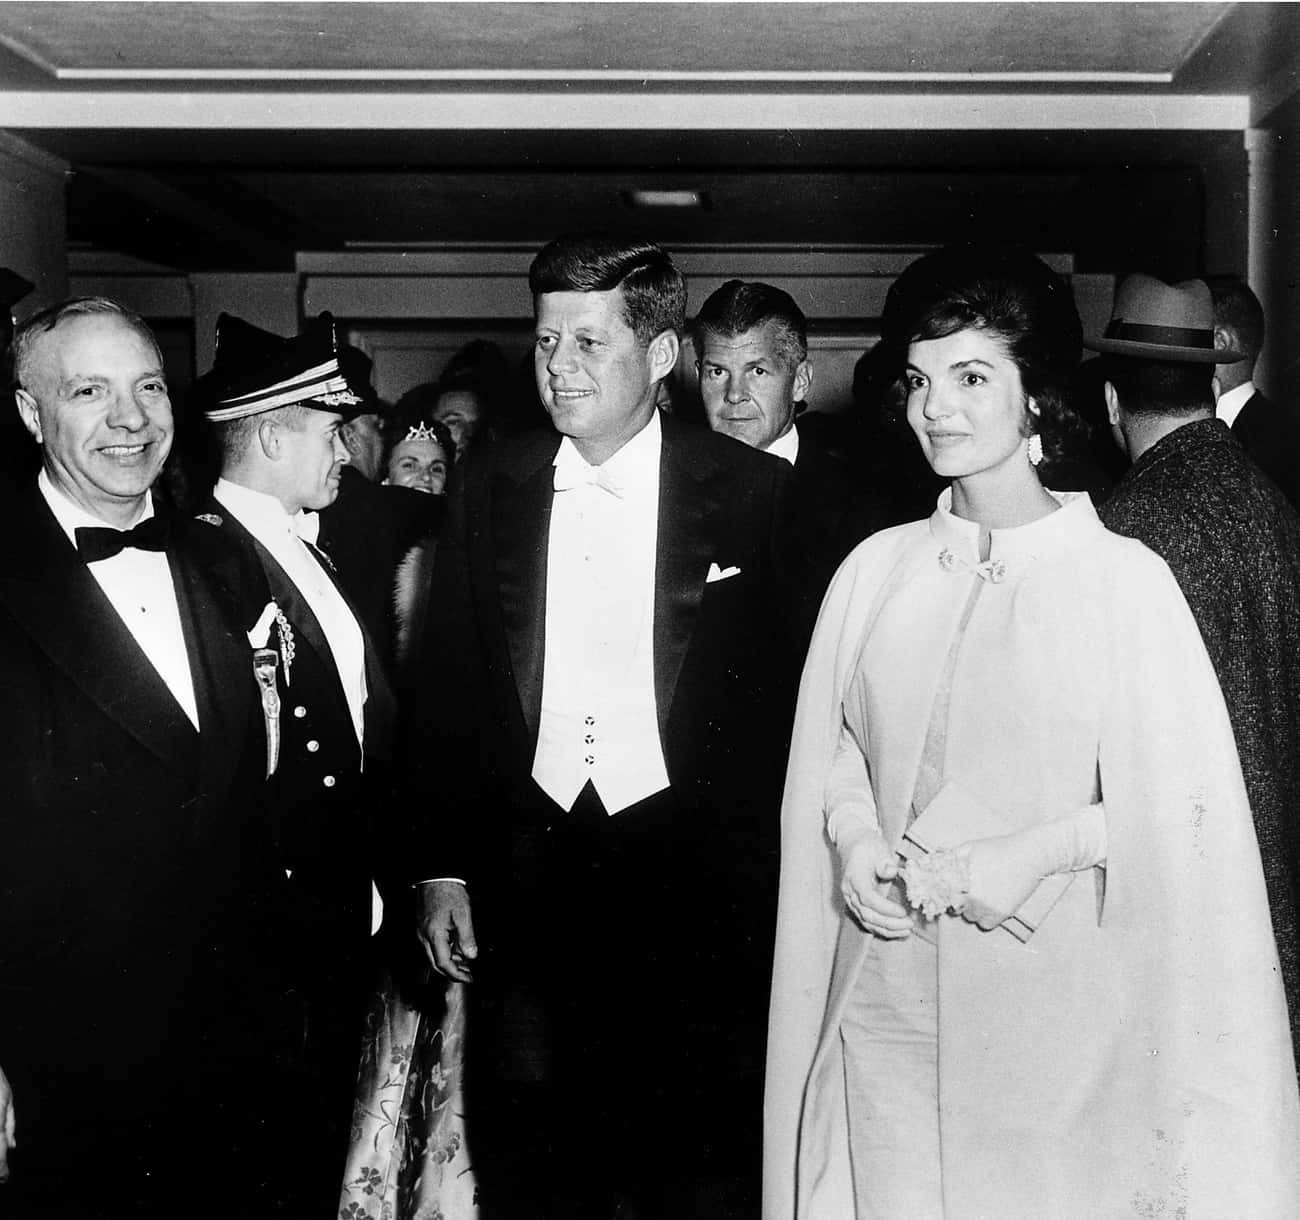 JFK May Have Had Wild Parties With The Rat Pack